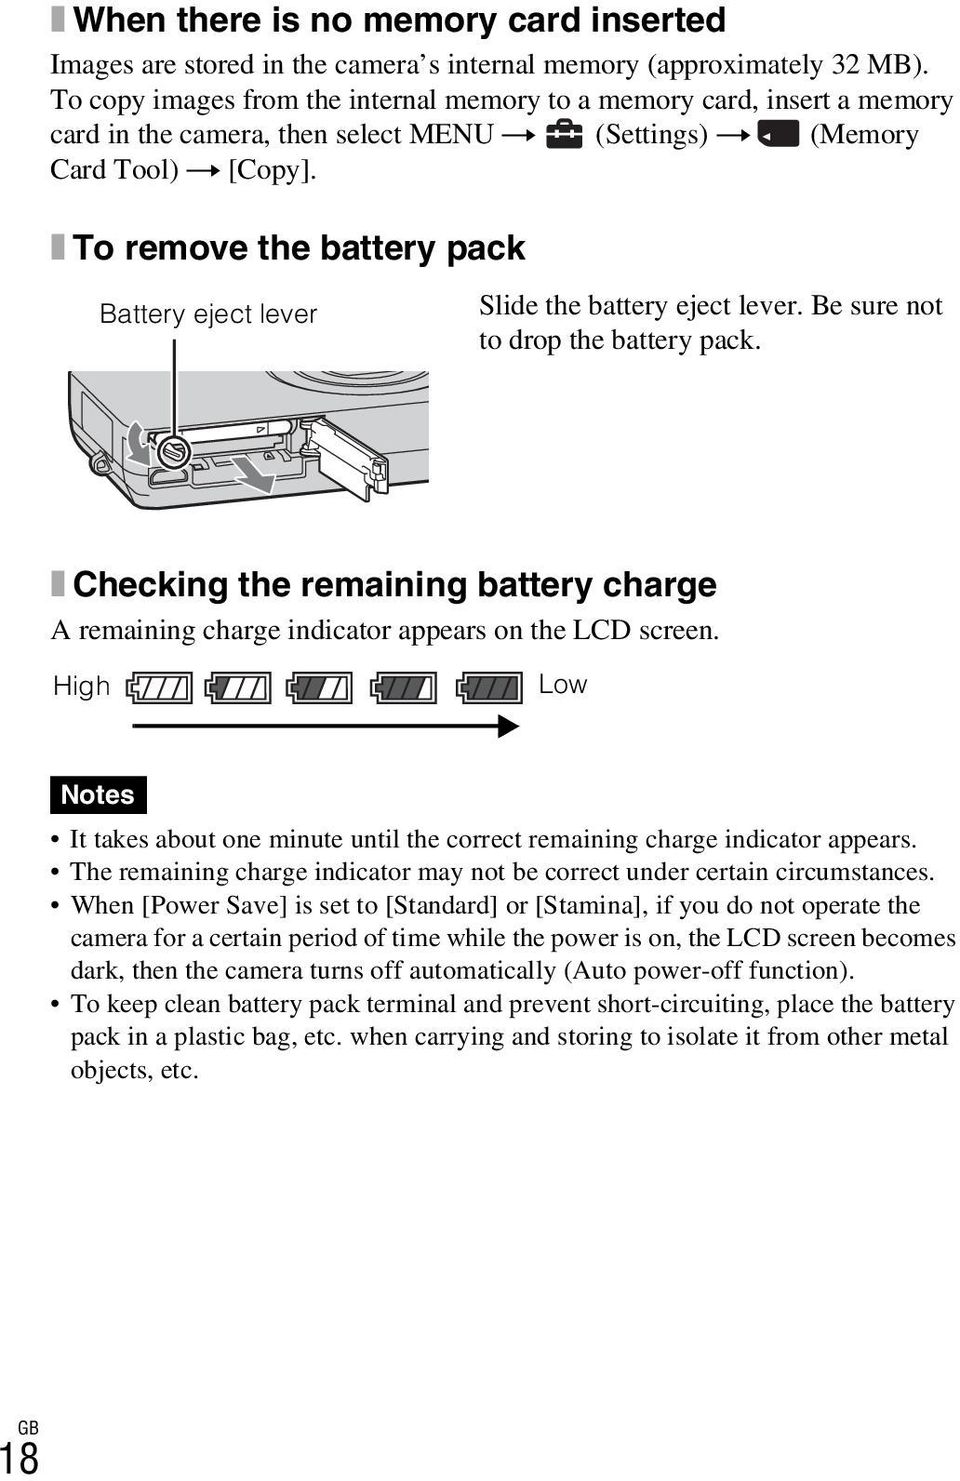 x To remove the battery pack Battery eject lever Slide the battery eject lever. Be sure not to drop the battery pack.